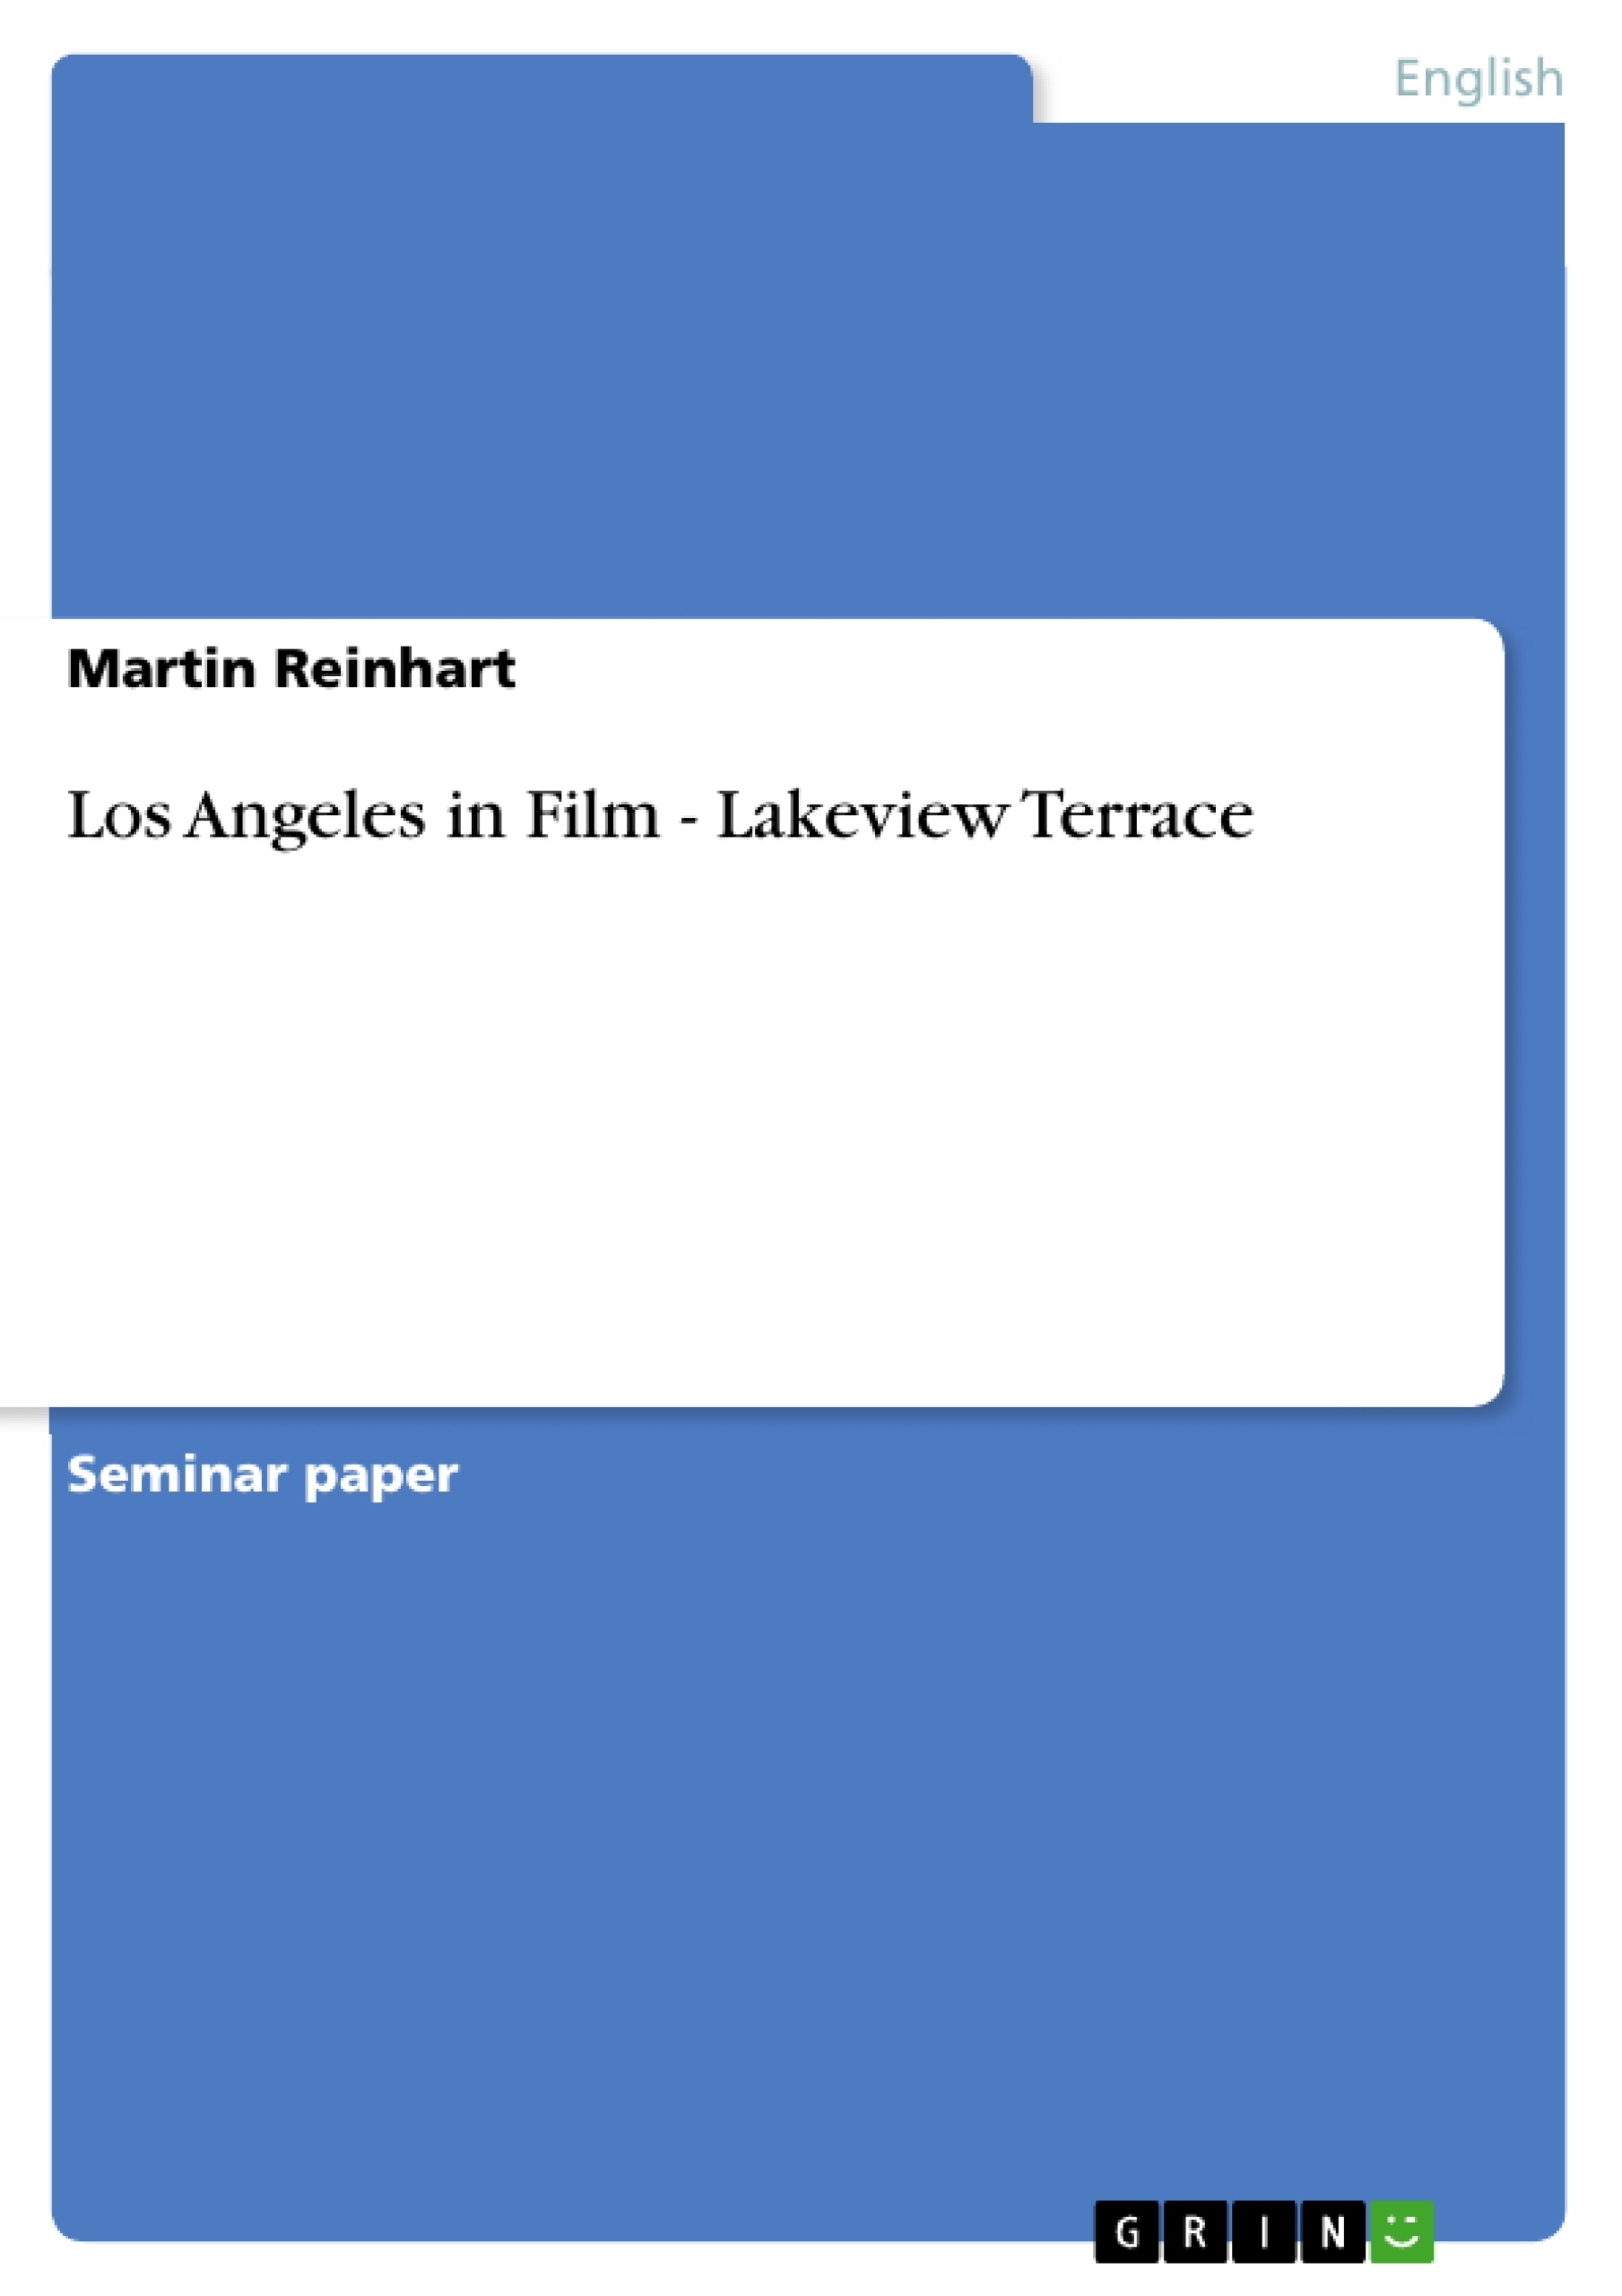 Title: Los Angeles in Film - Lakeview Terrace